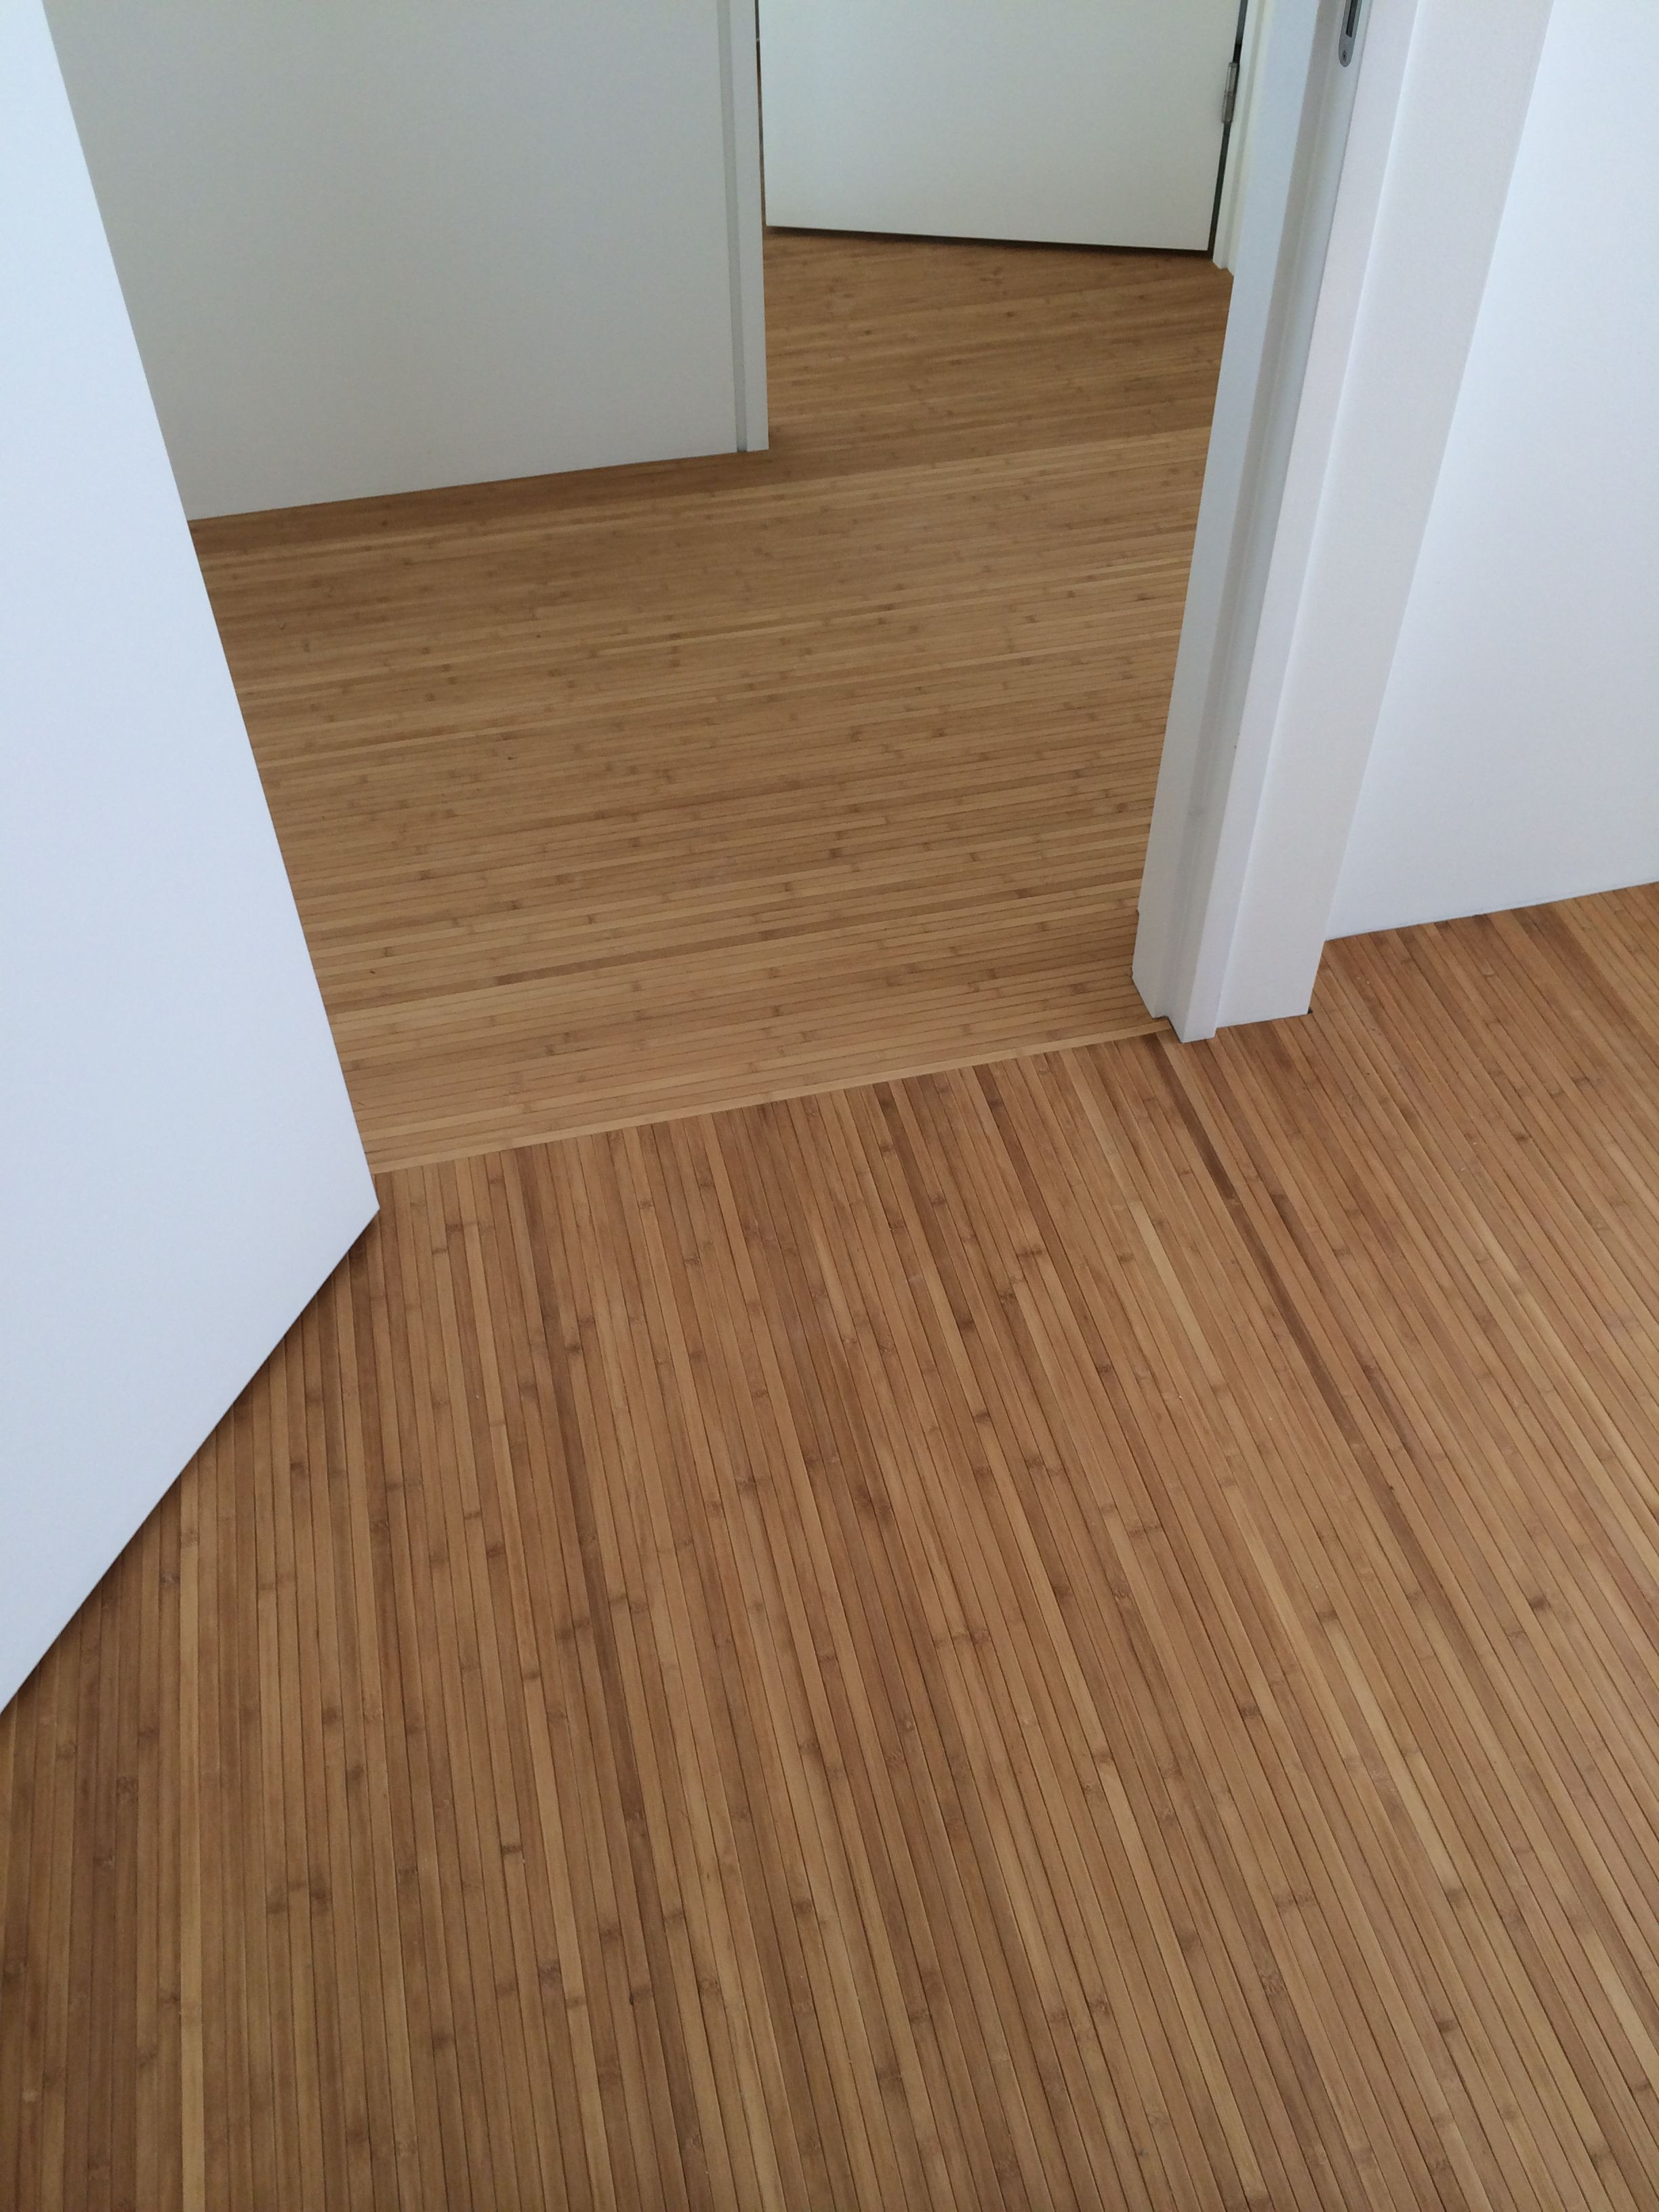 15 Popular Bamboo Flooring Cost Vs Hardwood Cost 2024 free download bamboo flooring cost vs hardwood cost of can you refinish bamboo floors floor with regard to can you refinish bamboo floors bamboe vloer podlahy drevo pinterest can you refinish bamboo floor